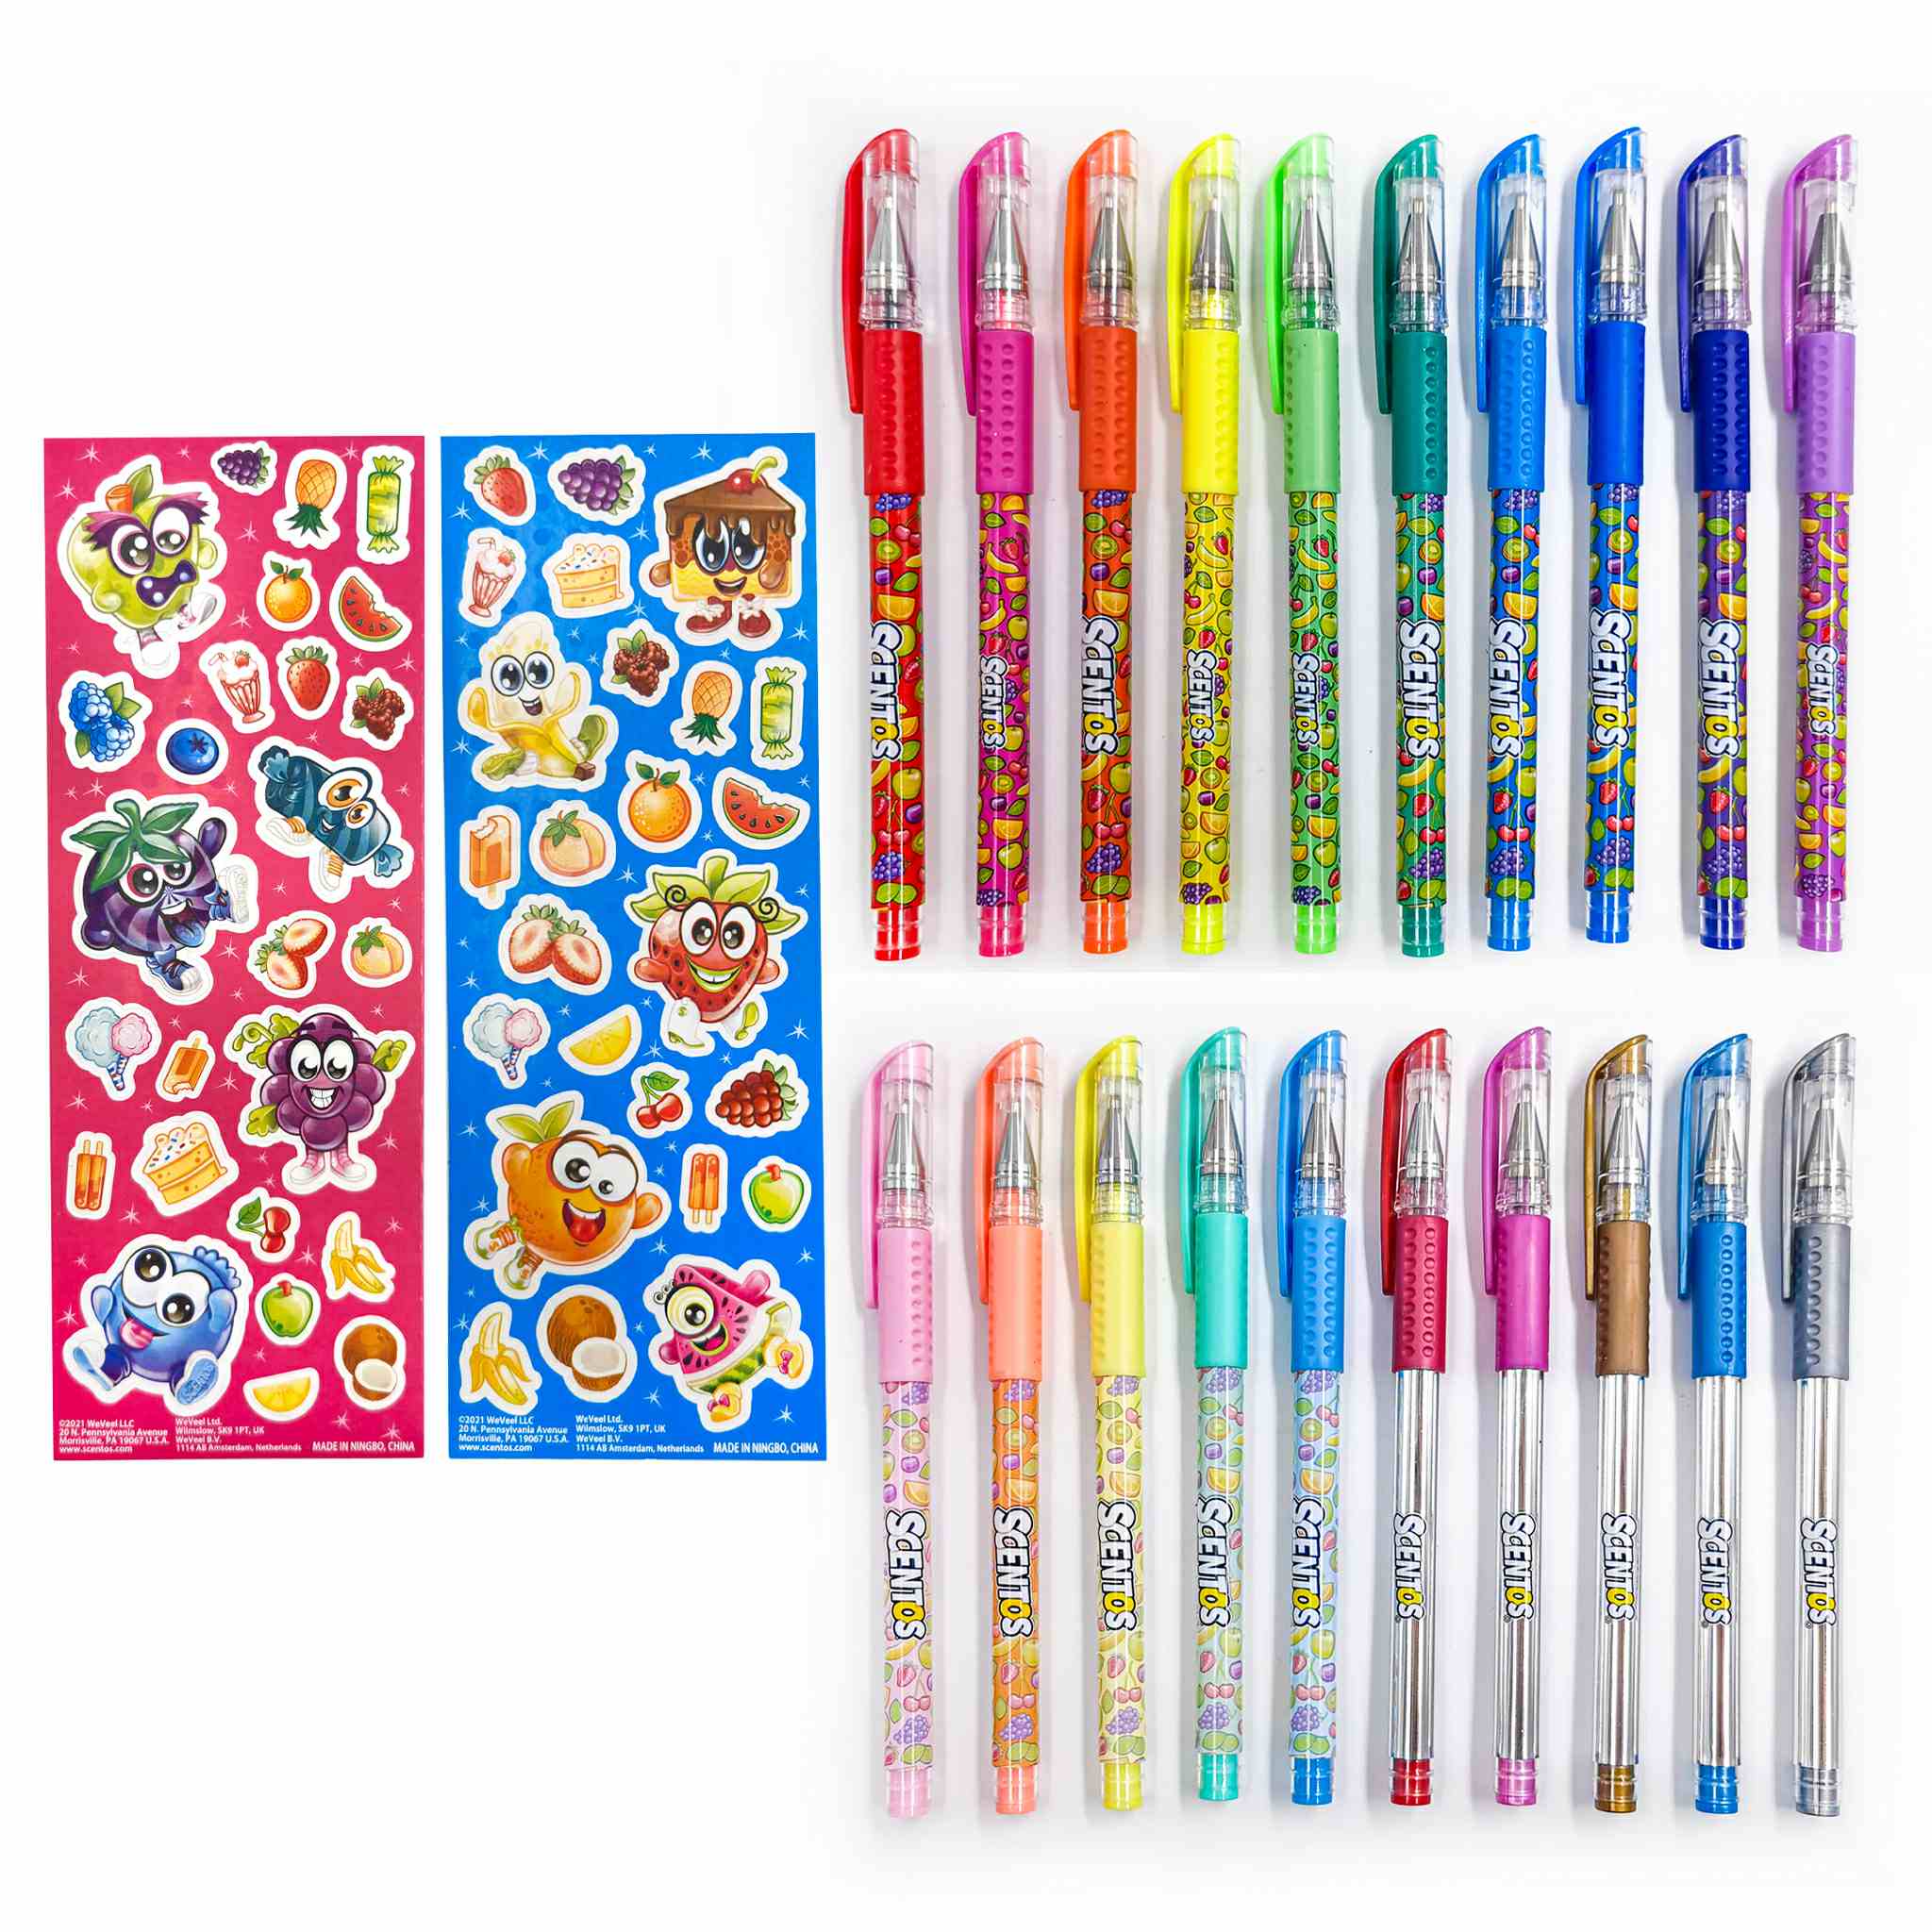 Colorful Candy Scented Gel Pens for Creative Journaling - 24-Pack